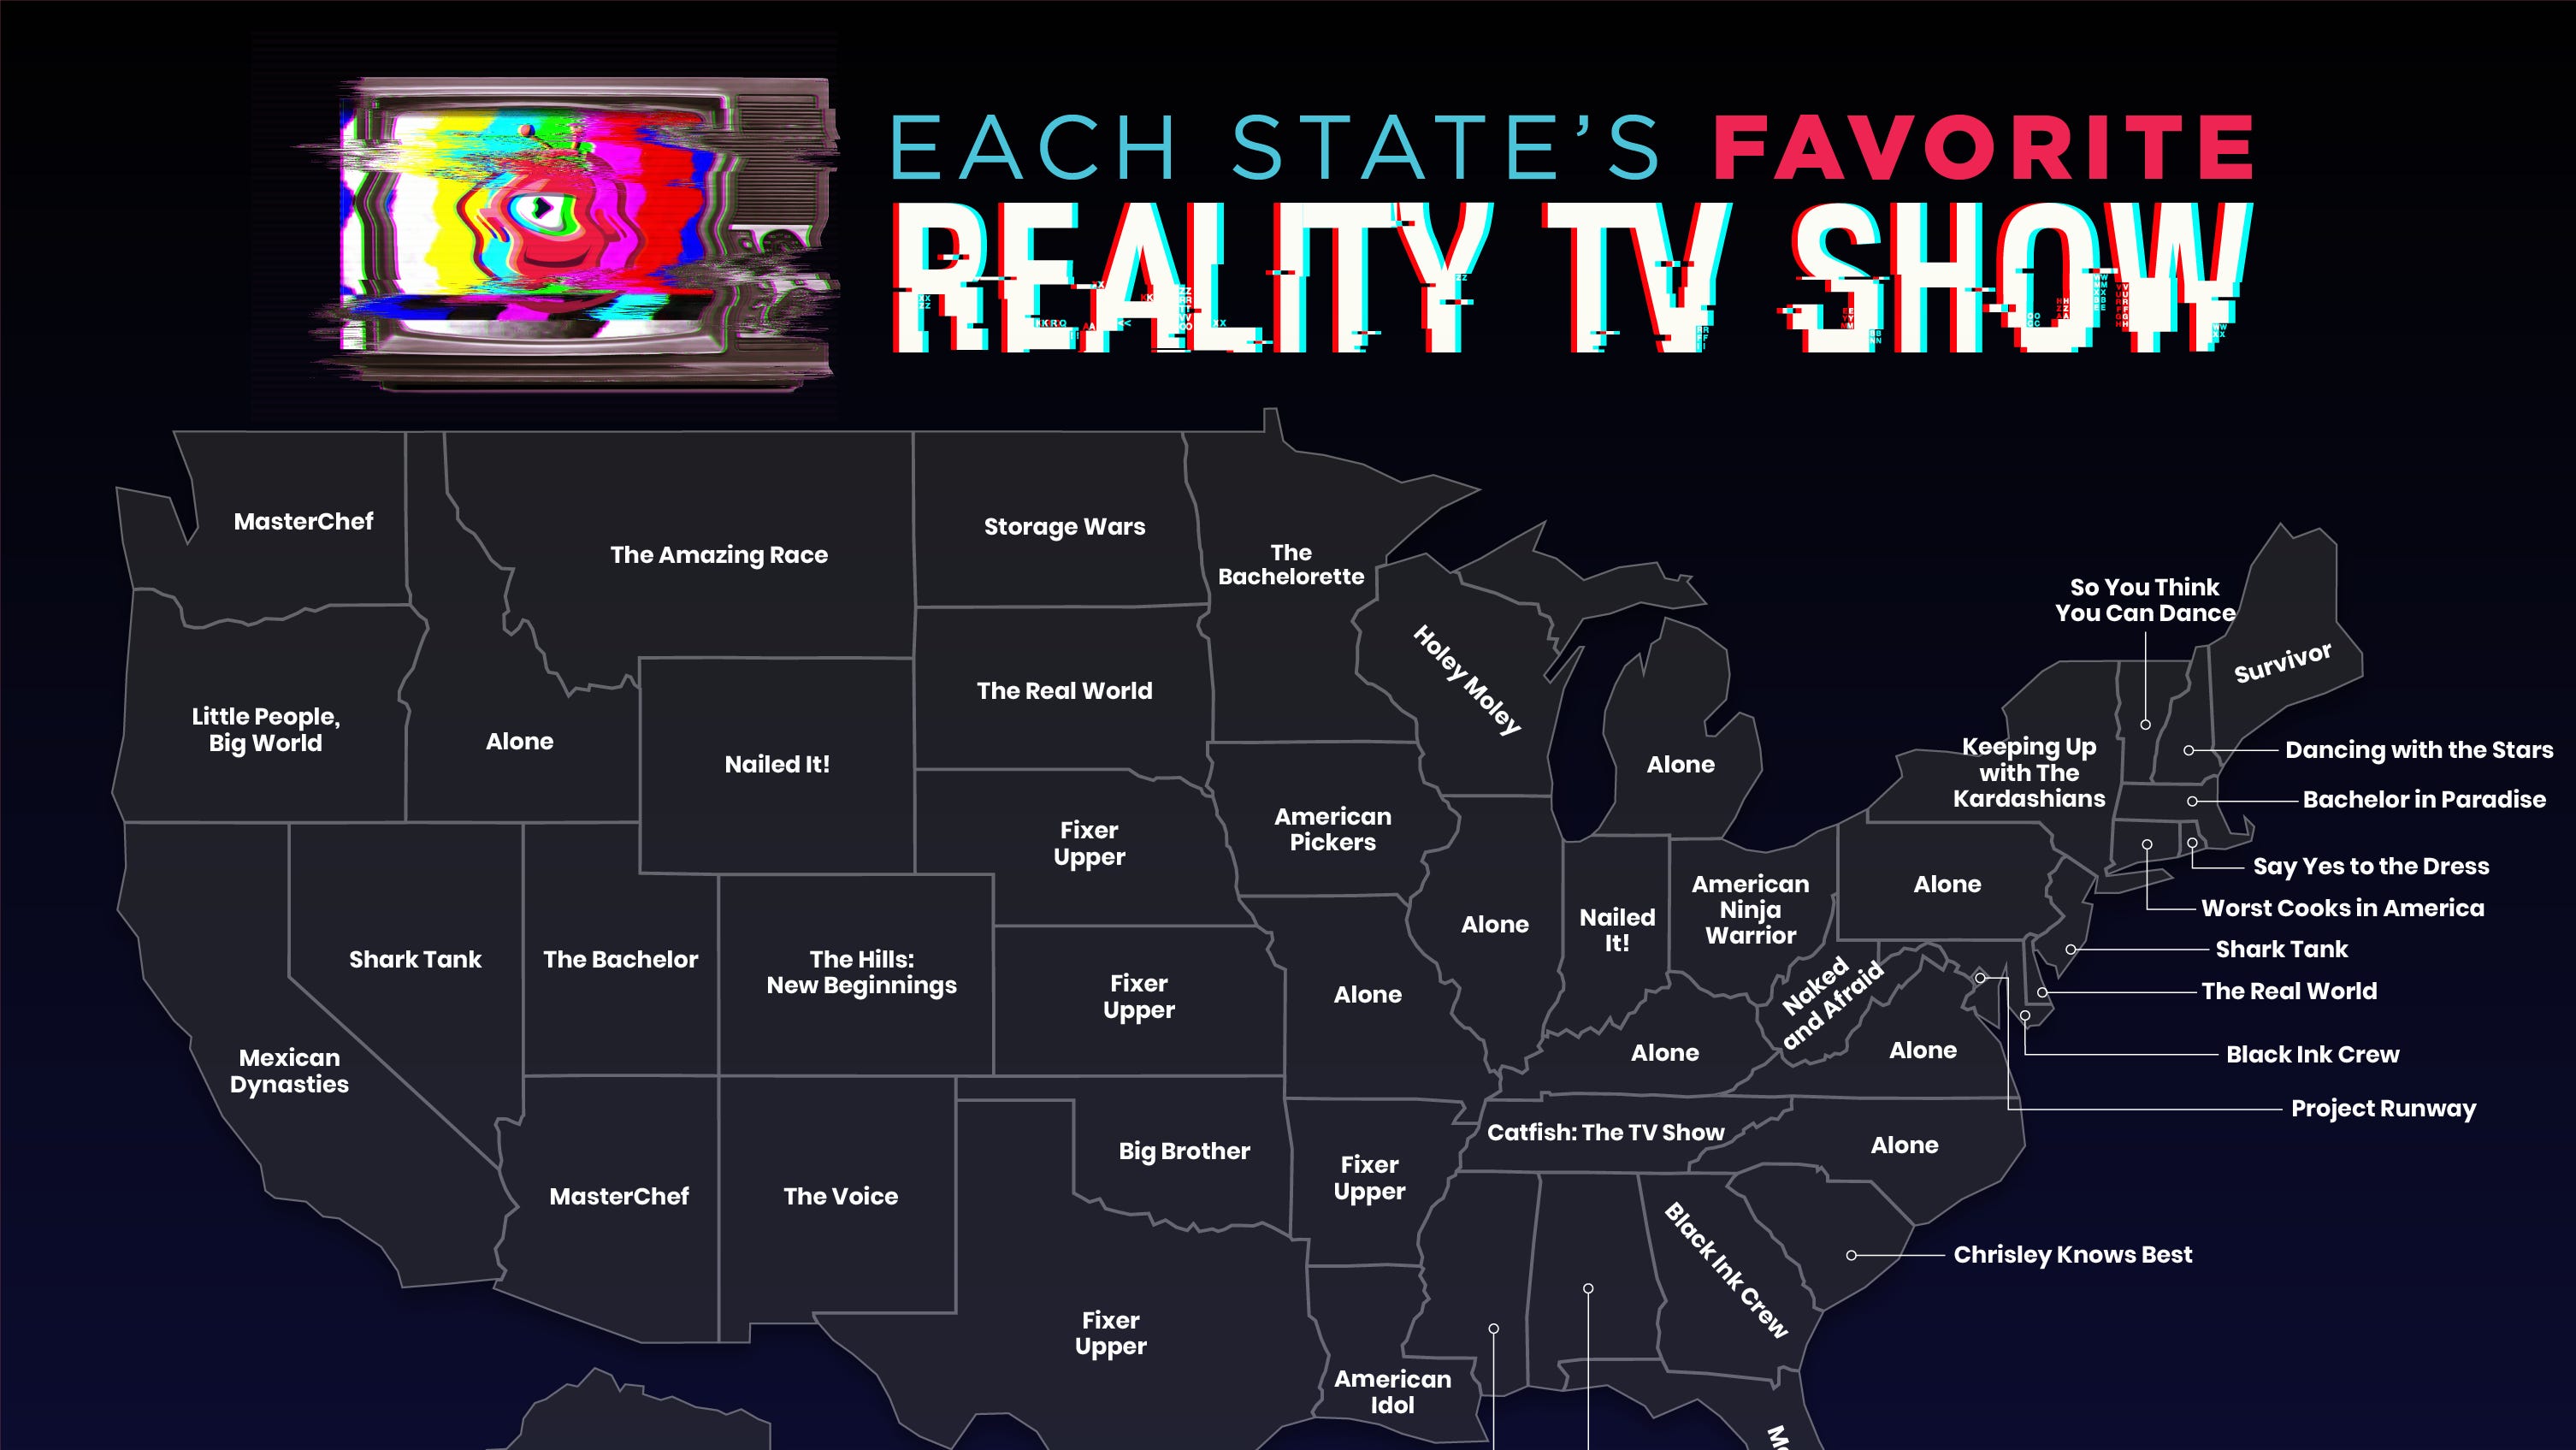 Svaghed Inspirere tillykke This report shows each state's favorite reality TV show